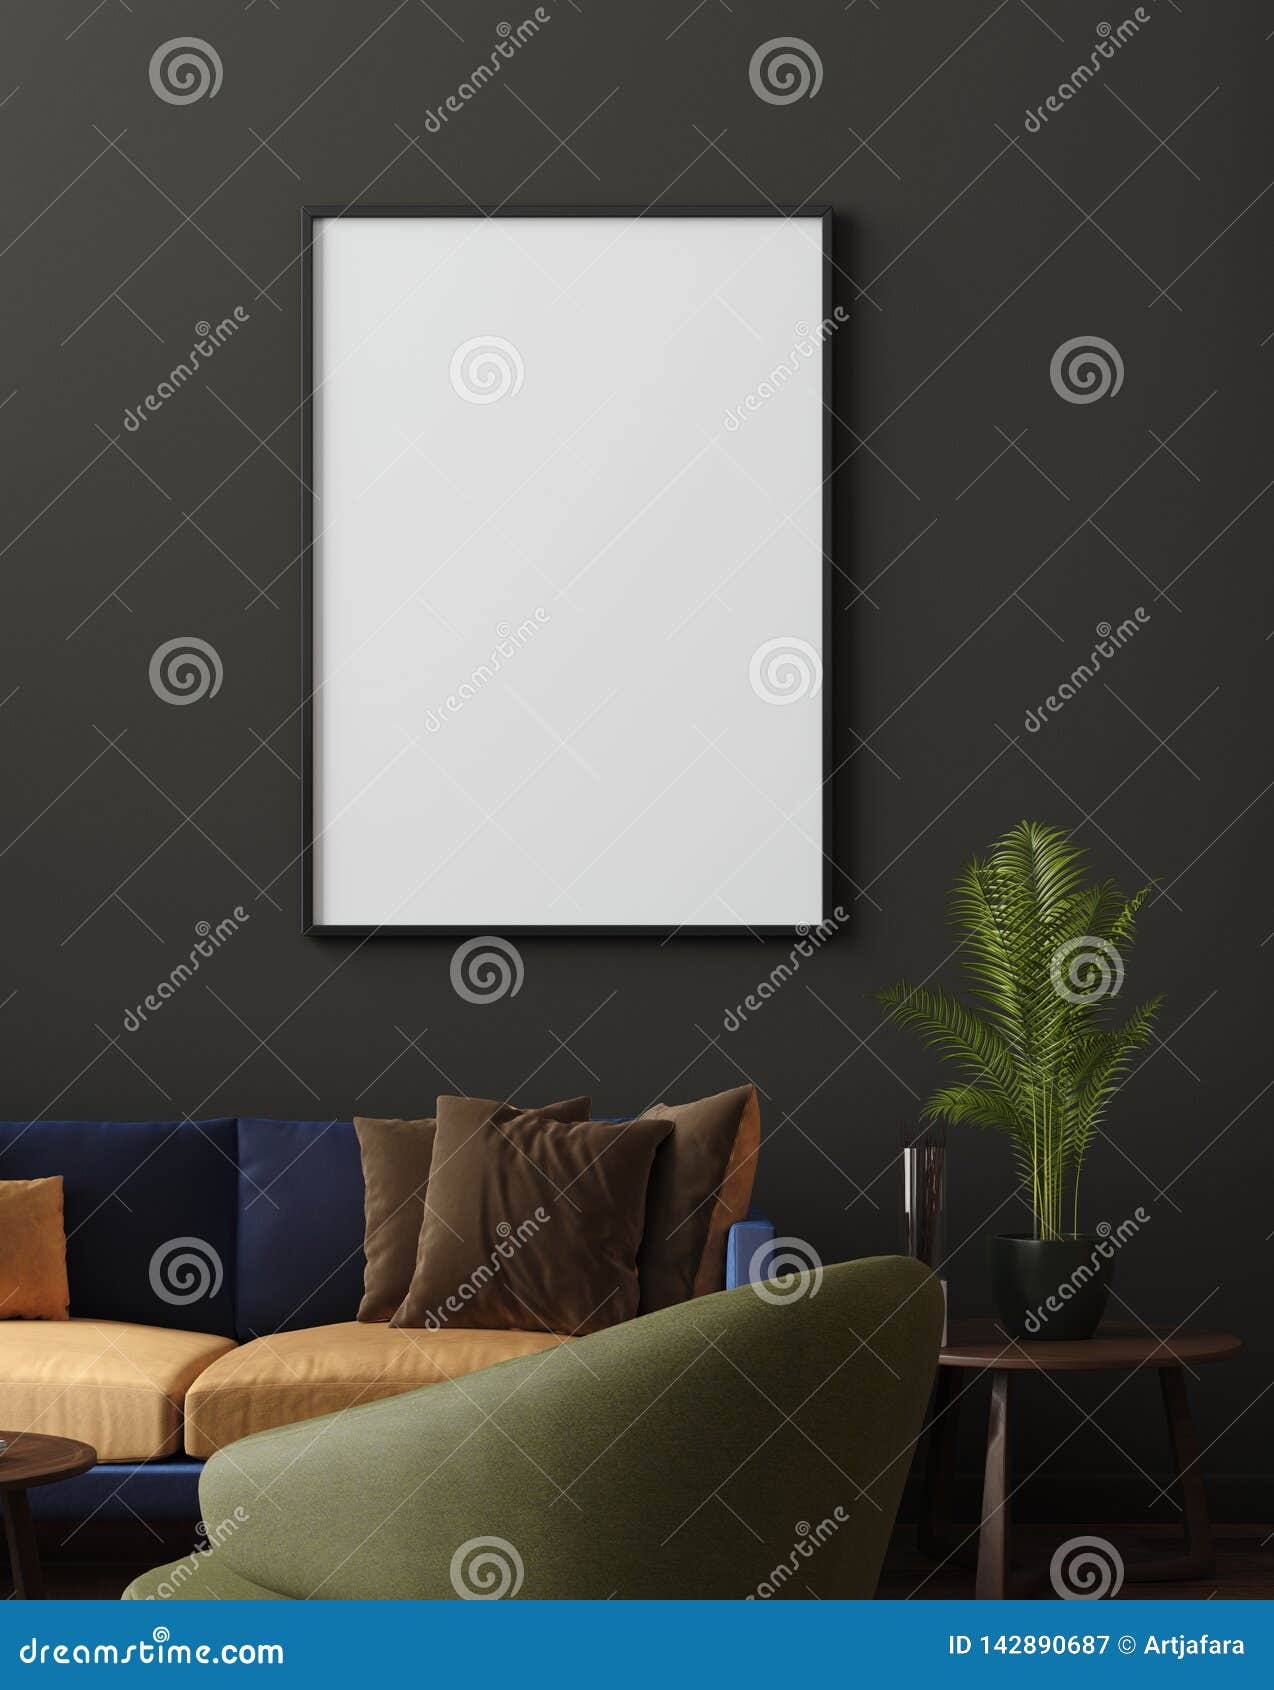 mock up poster in luxury modern living room interior, dark green brown wall, modern sofa and plants